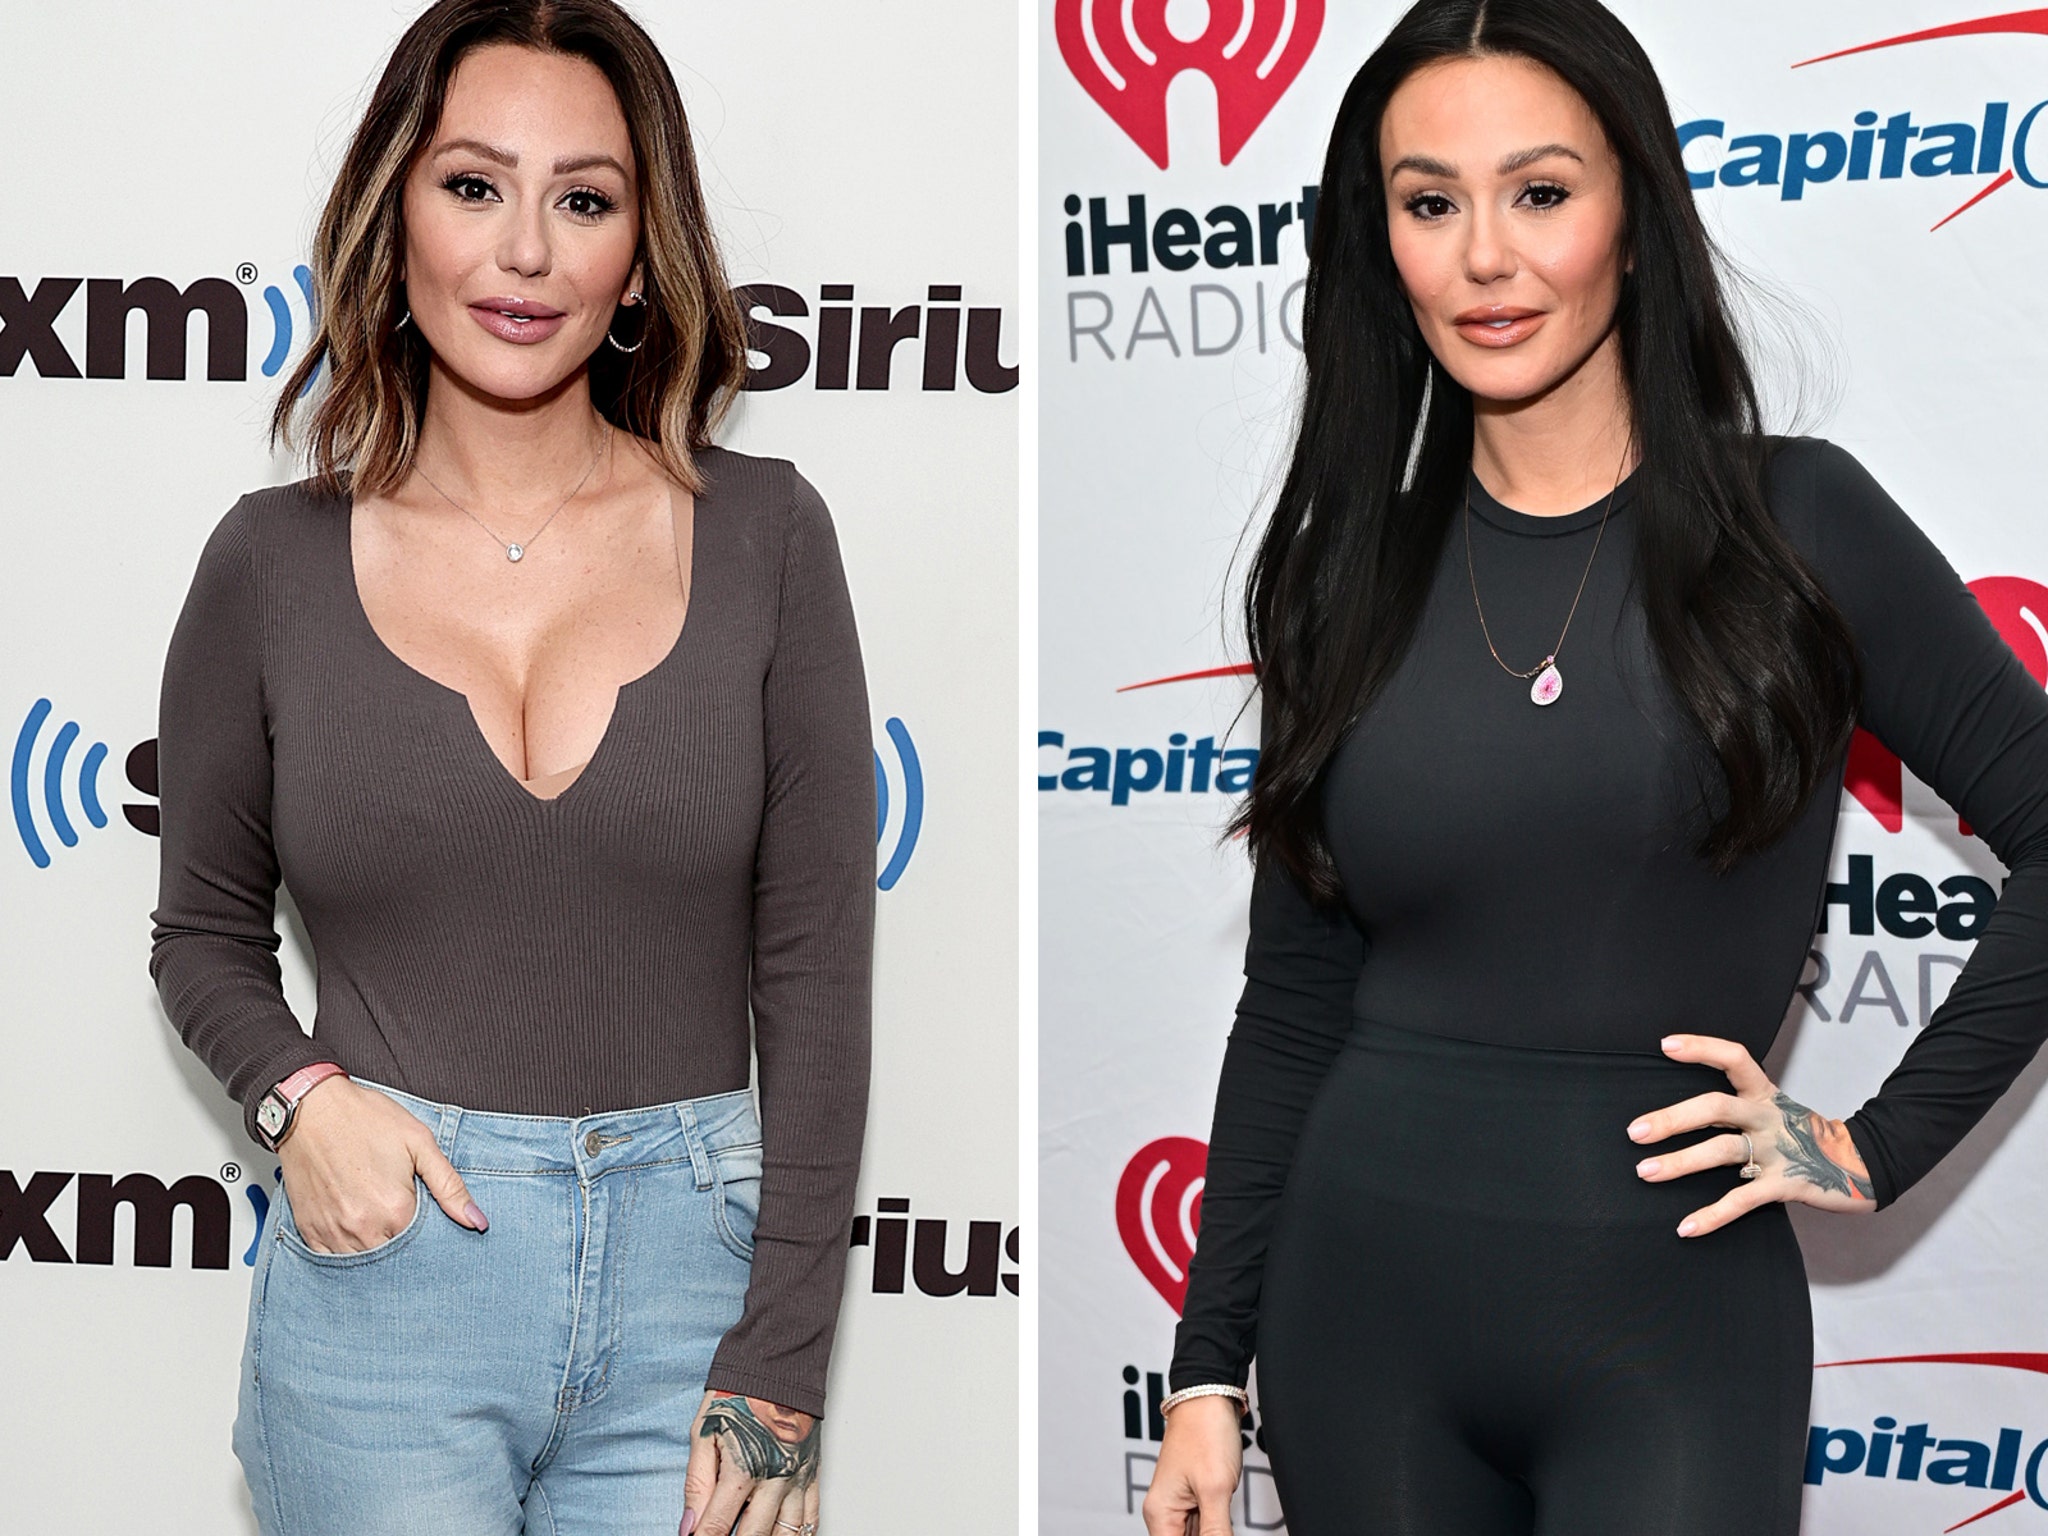 Jersey Shore star Jenni 'JWoww' Farley reveals she had a breast reduction  and is now 4 bra sizes smaller